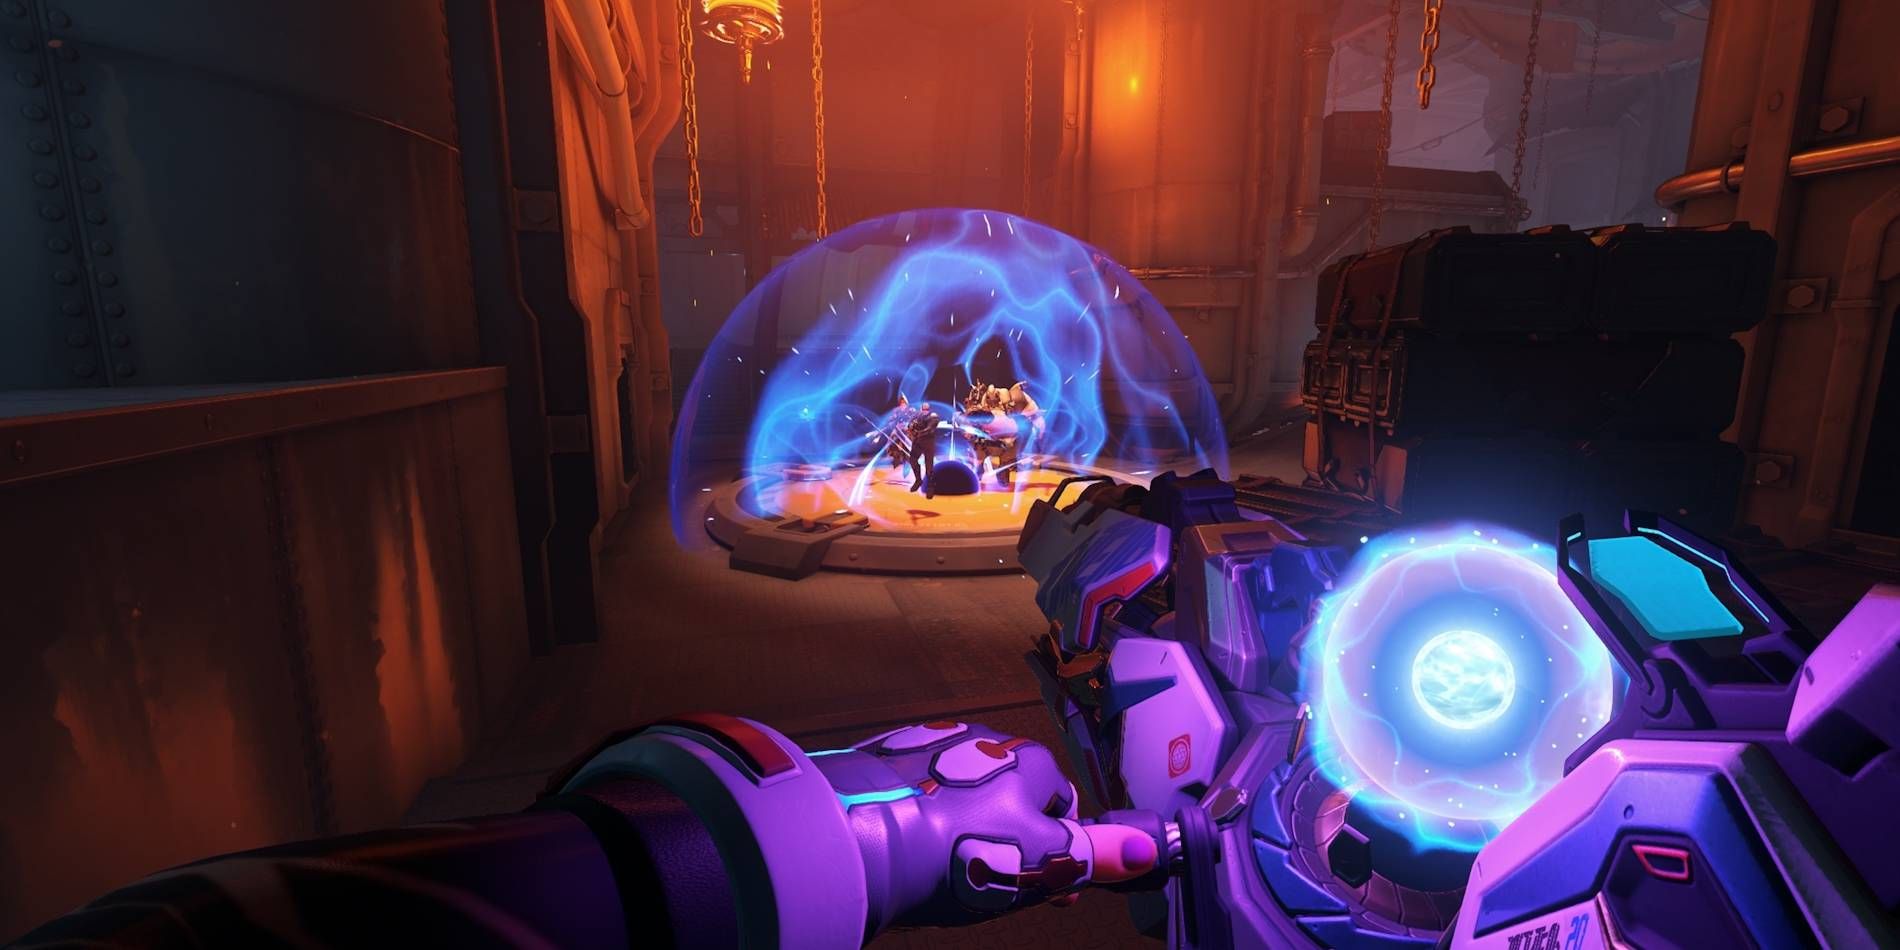 Overwatch 2 Zarya Graviton Surge Ultimate Ability Being Used on London Map Against Enemy Orisa and Other Foe Player Perspective Screenshot